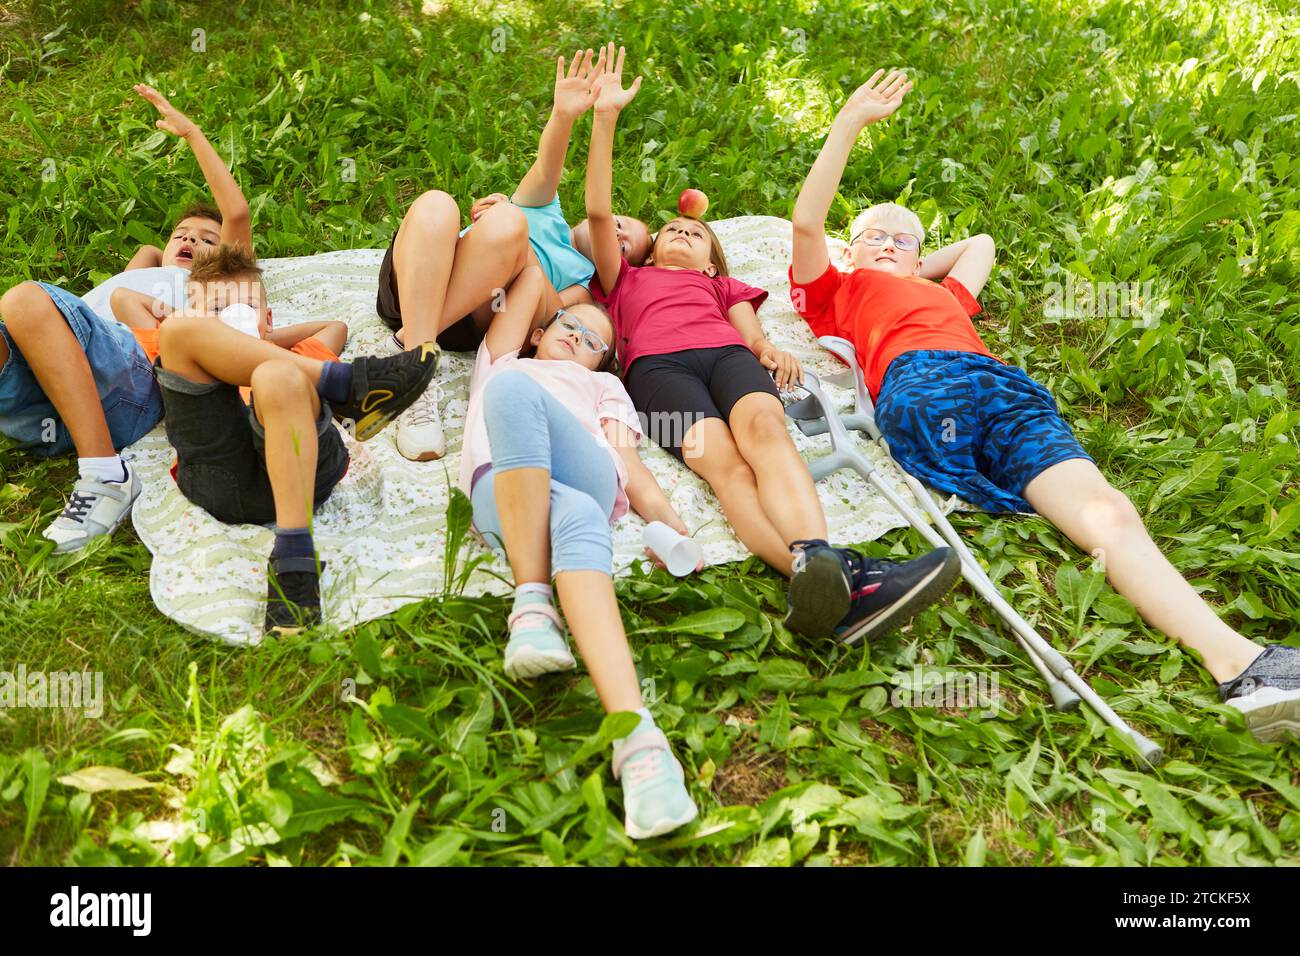 Male and female friends lying down on blanket with hand raised at park Stock Photo